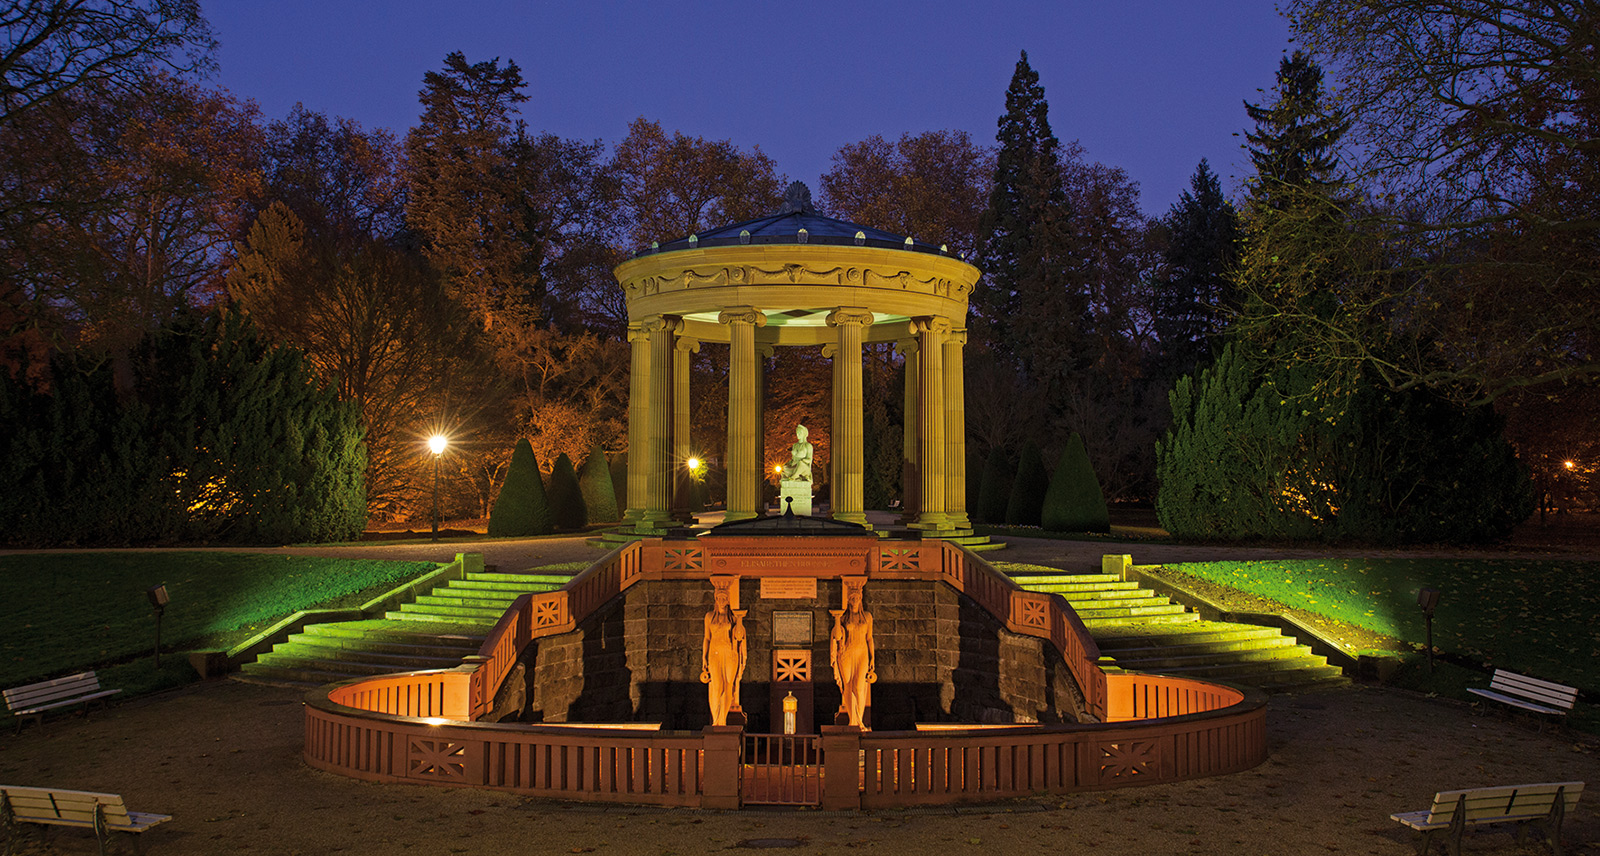 The Elisabethenbrunne is still the most important mineral spring in Bad Homburg. The temple covering the spring was designed by the Emperor Wilhelm II himself. The statue of Hygeia, the Greek goddess of health, is seated inside the temple.